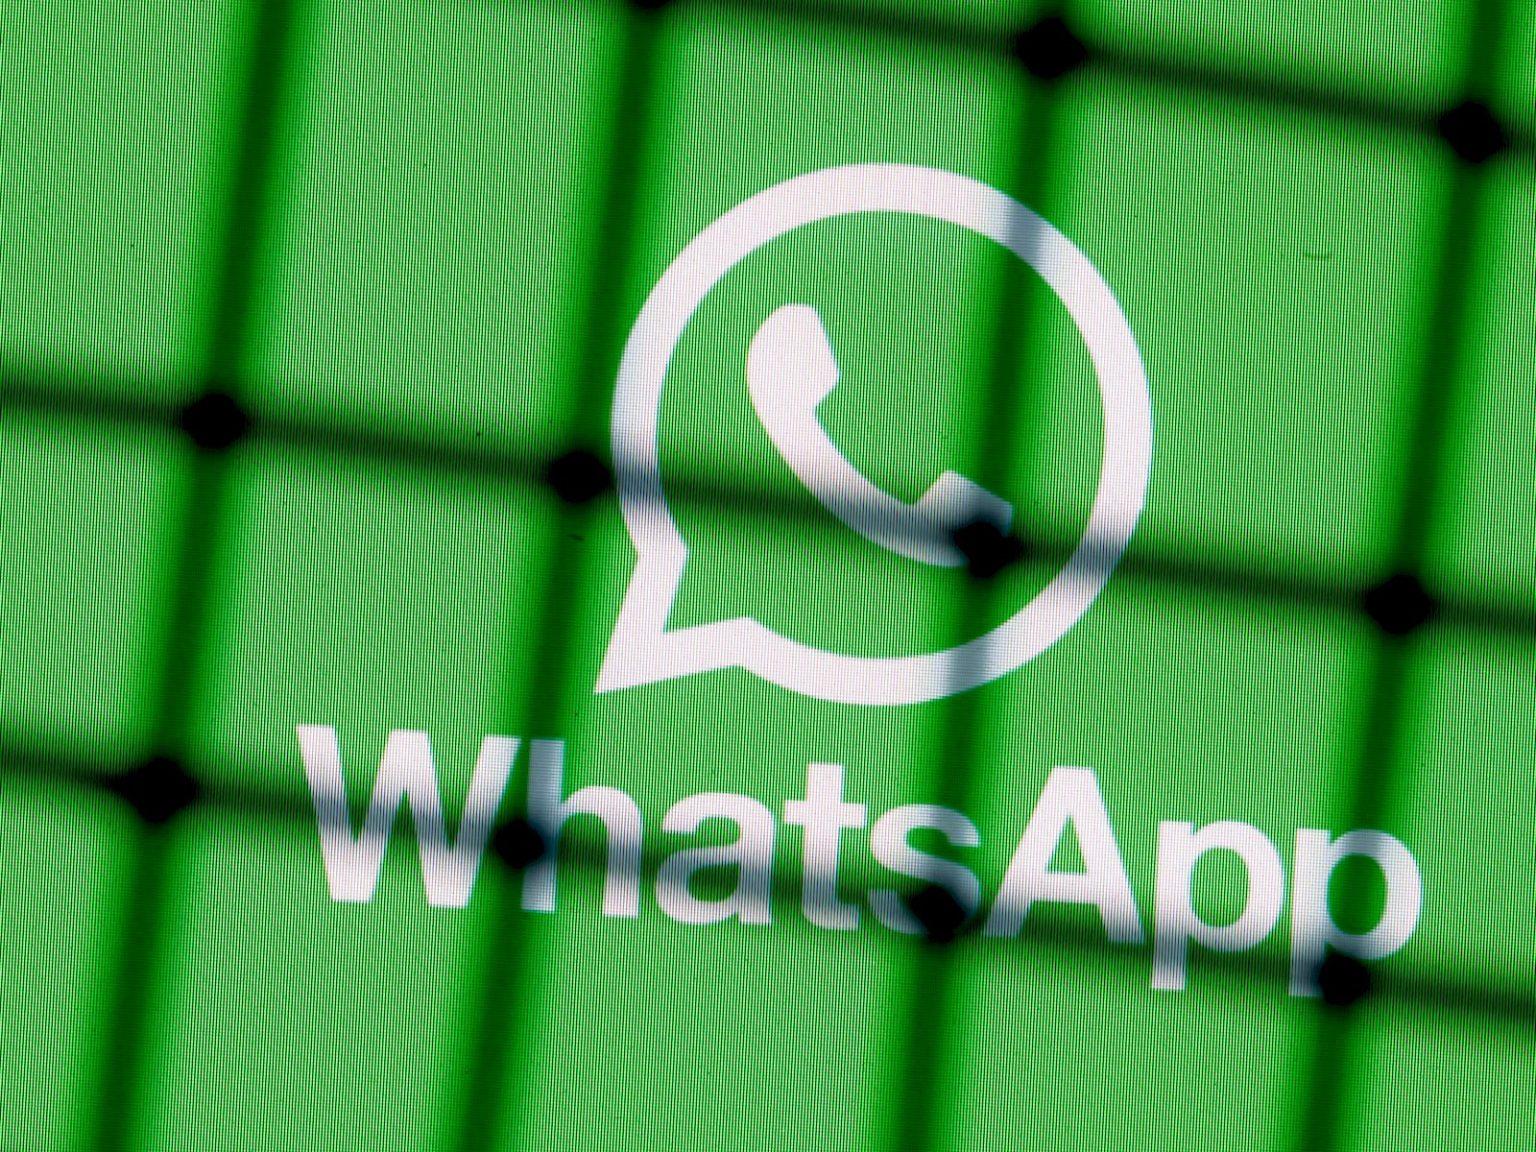  A close-up of a green WhatsApp logo on a screen with a caption reading 'WhatsApp' underneath. The image is in a grid pattern.